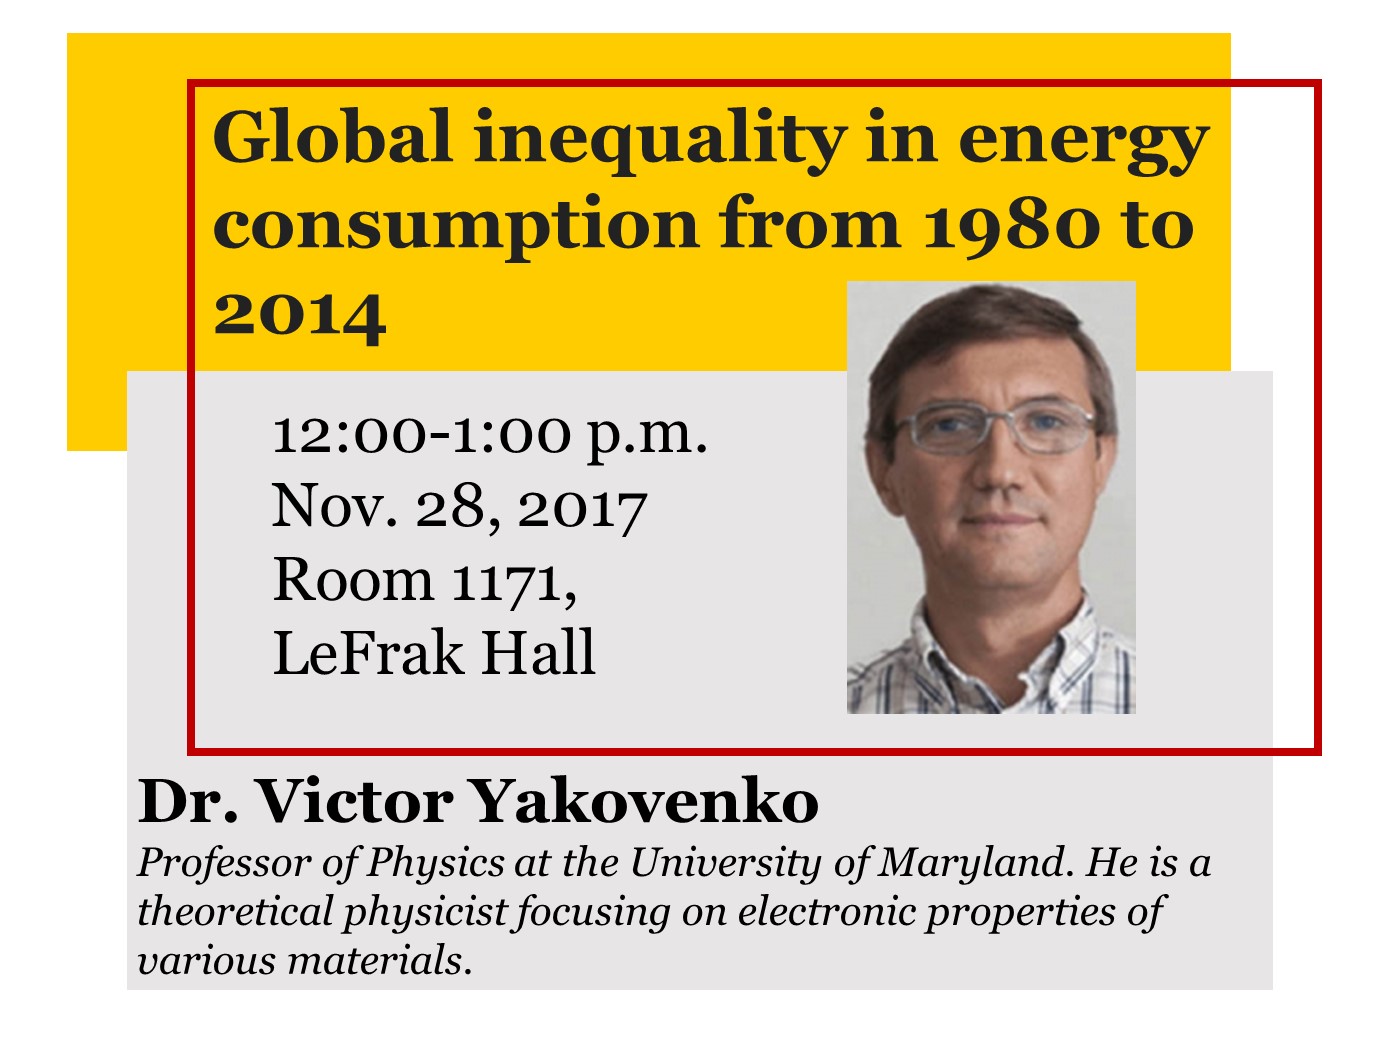 Global inequality in energy consumption from 1980 to 2014